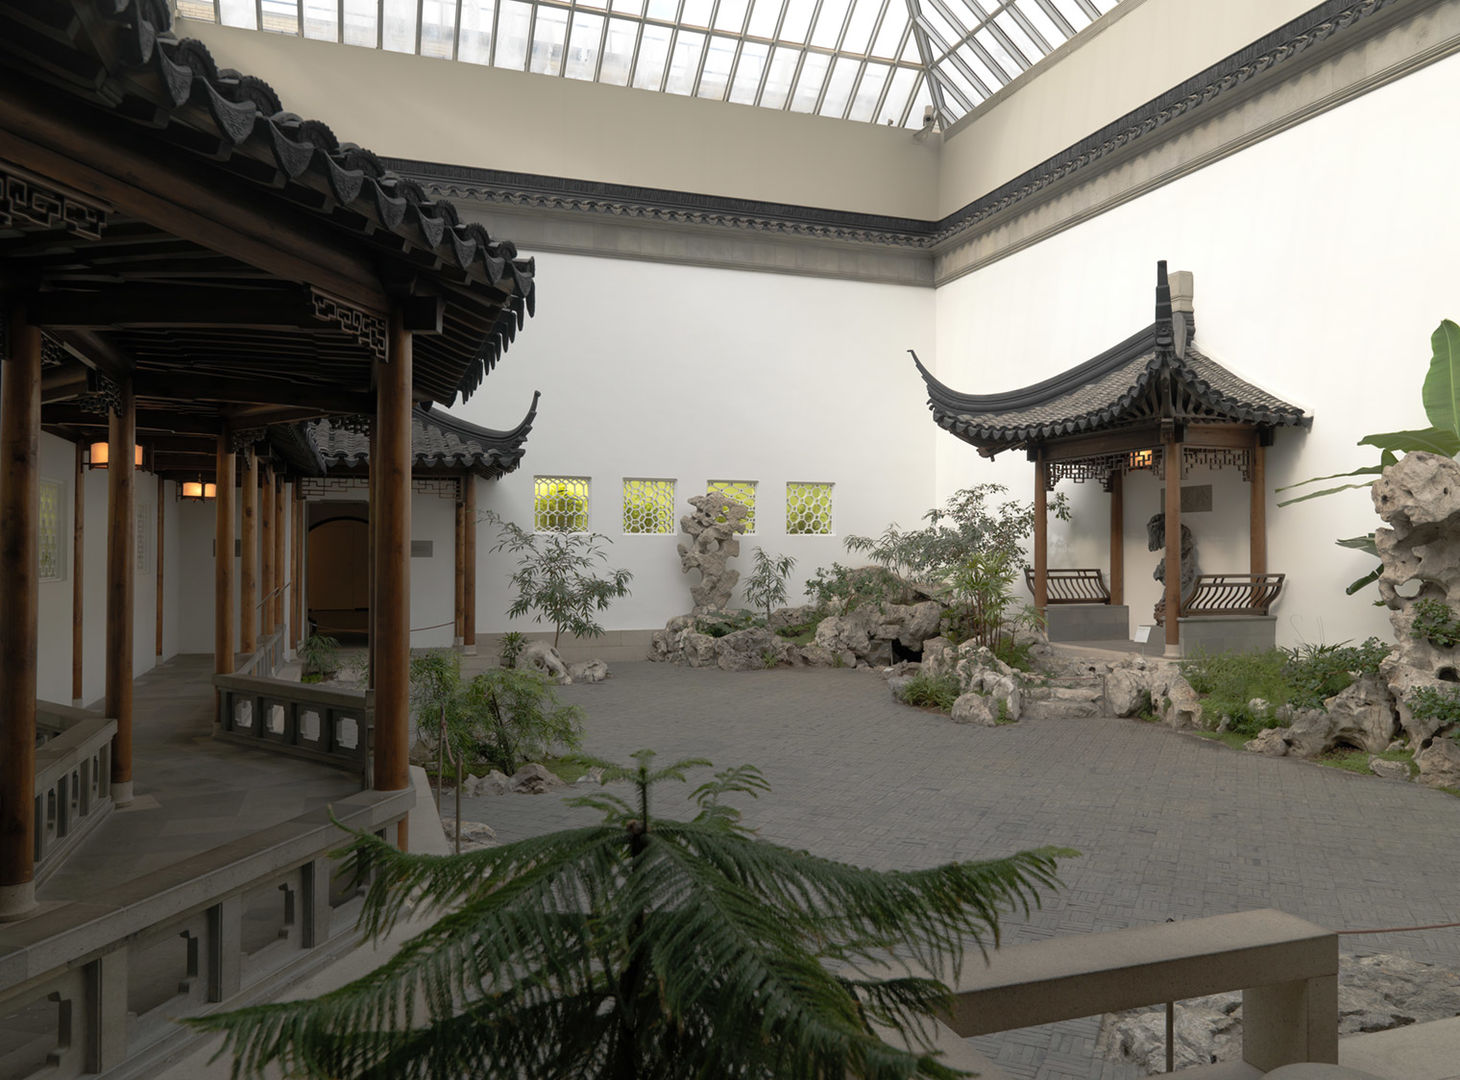 An interior courtyard with pagodas, plantings, ornamental rocks, and a fish pond